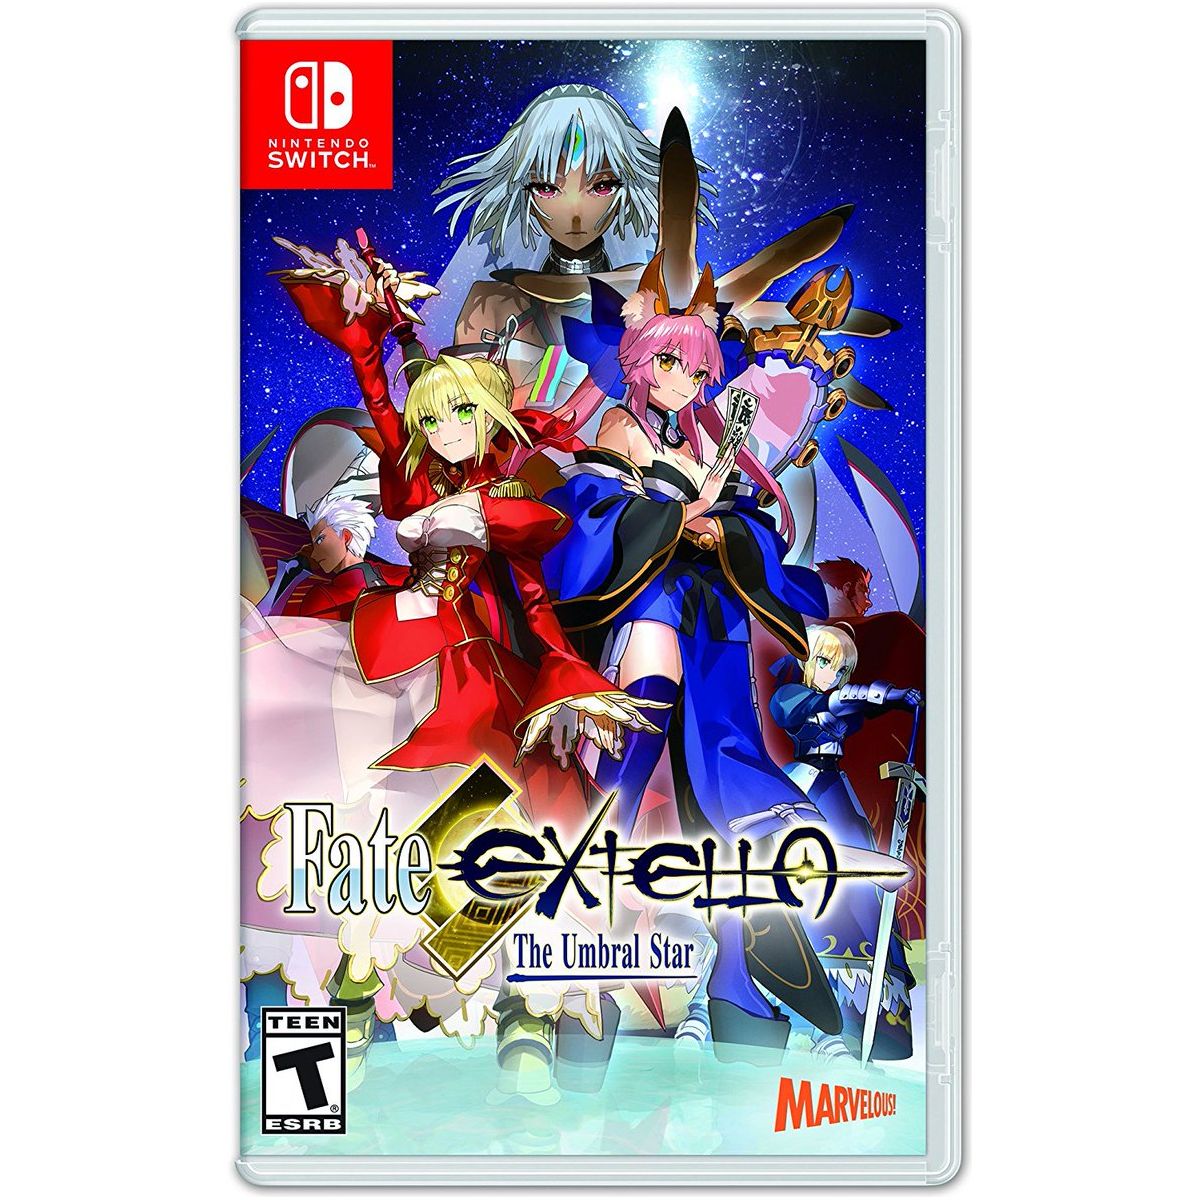 Fate/EXTELLA: The Umbral Star NSW